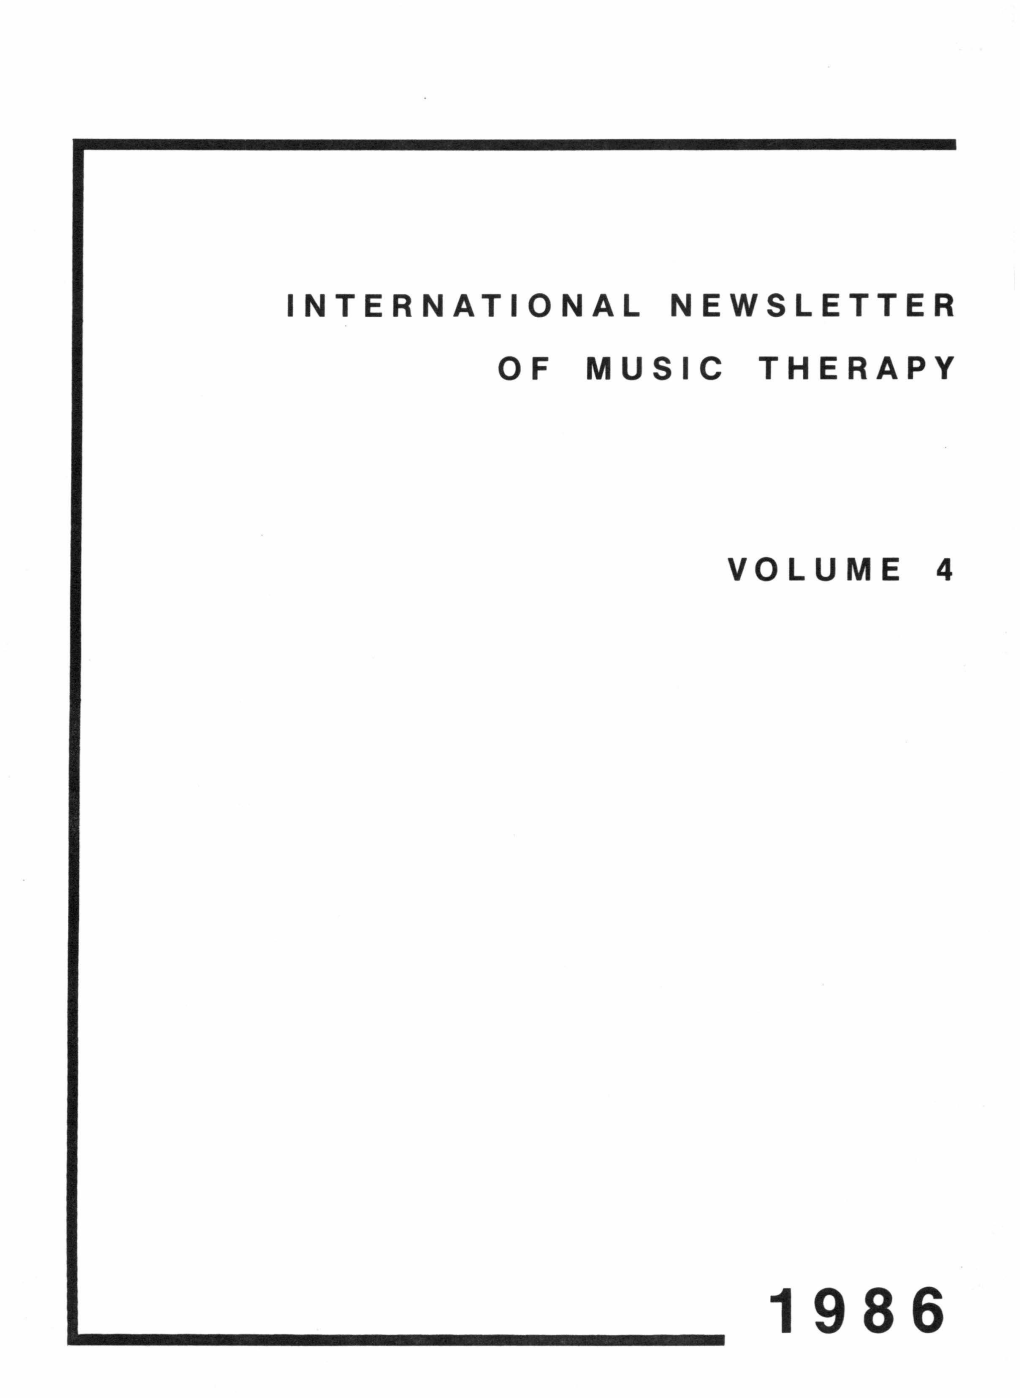 International Newsletter of Music Therapy Volume 4